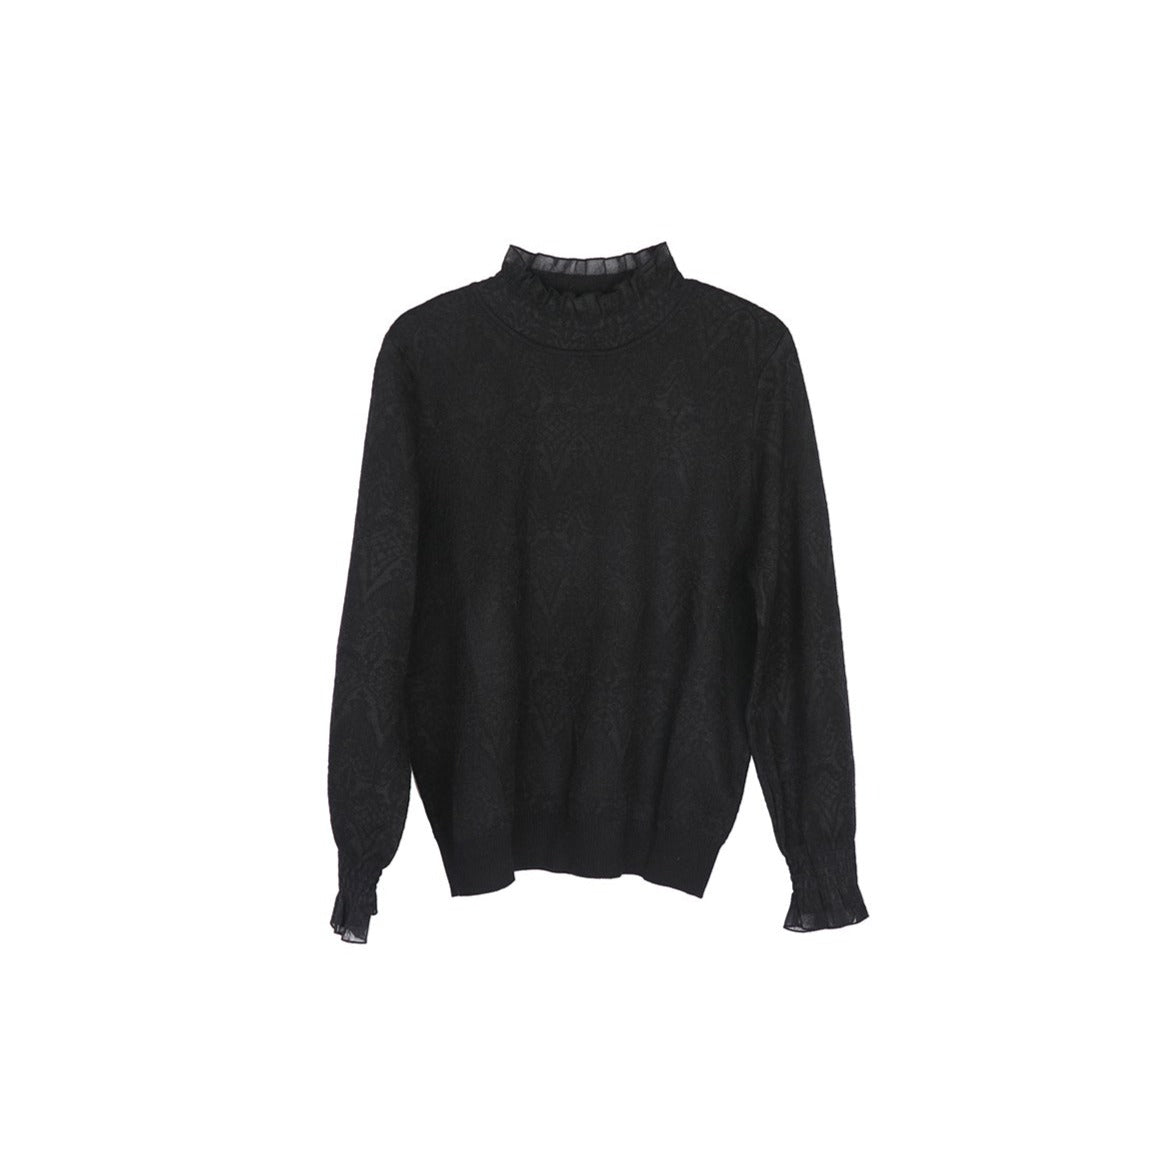 Well-tailored palace style stand-up collar long-sleeved sweater